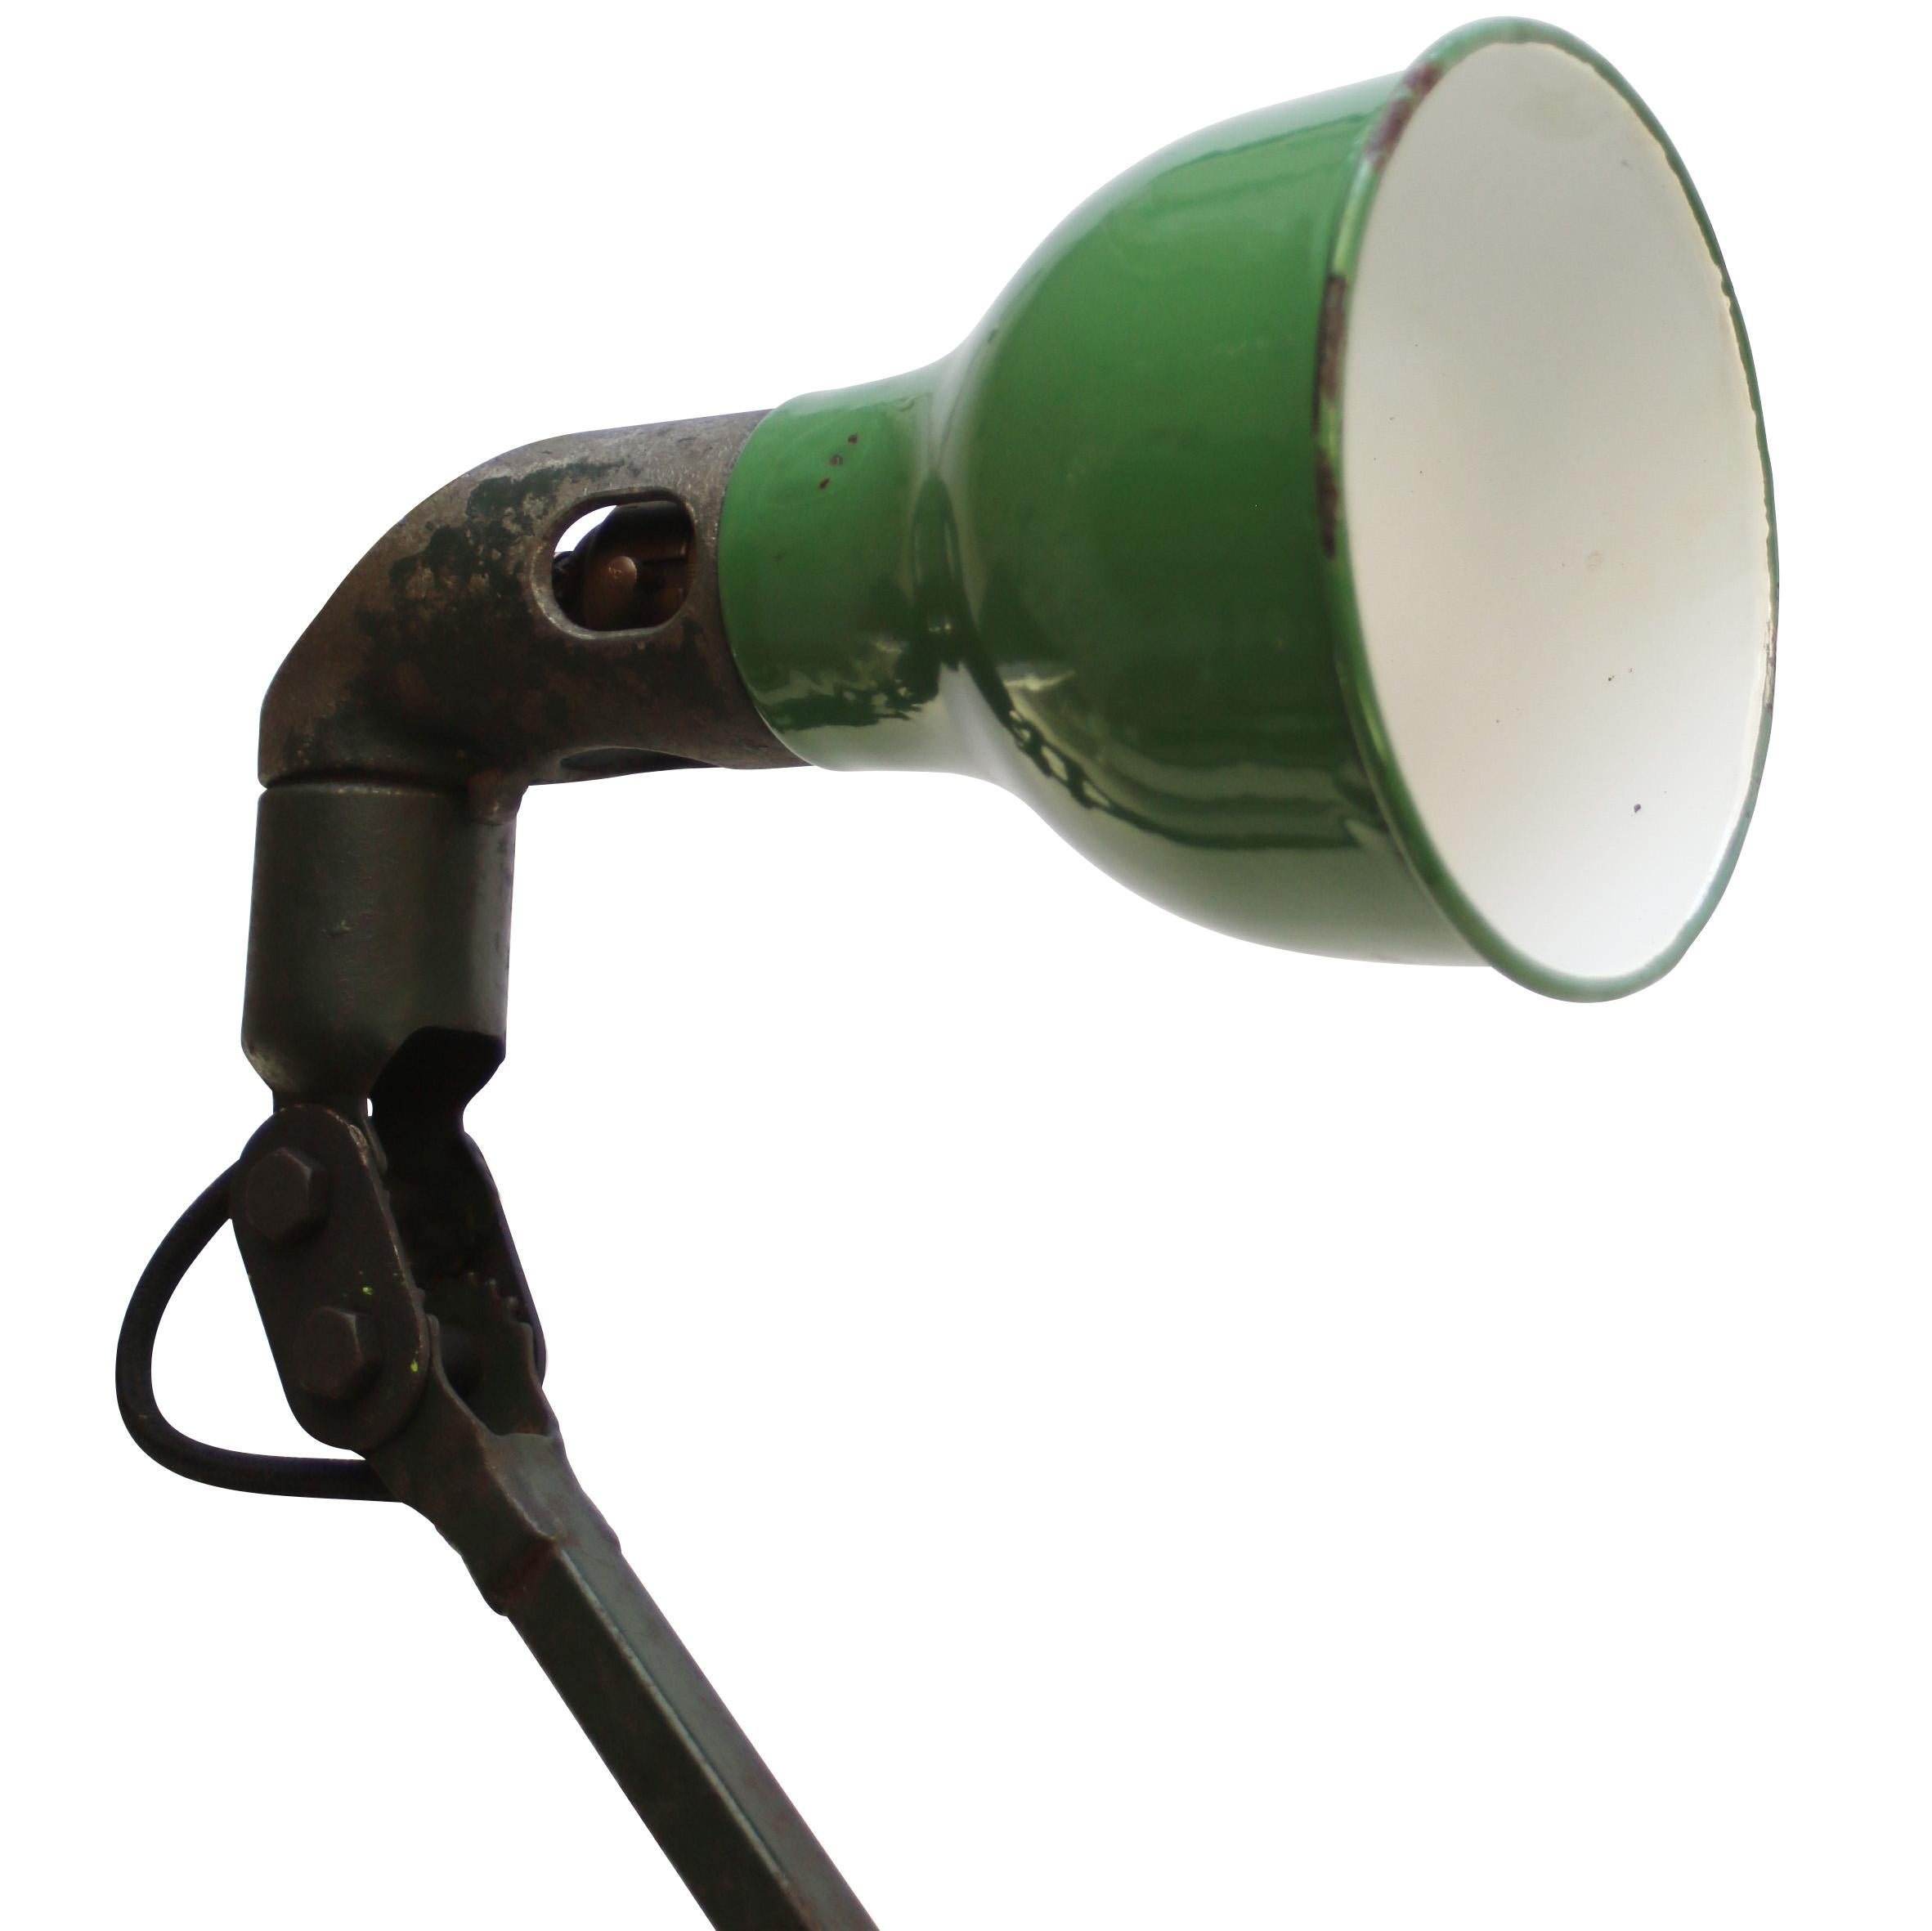 1930s Green enamel, cast iron industrial 2 arm machinist work light by MEK ELEK, UK
adjustable in height and angle
including plug and switch

Diameter base 13.5 cm

B22 bulb holder

Weight: 3.60 kg / 7.9 lb

Priced per individual item. All